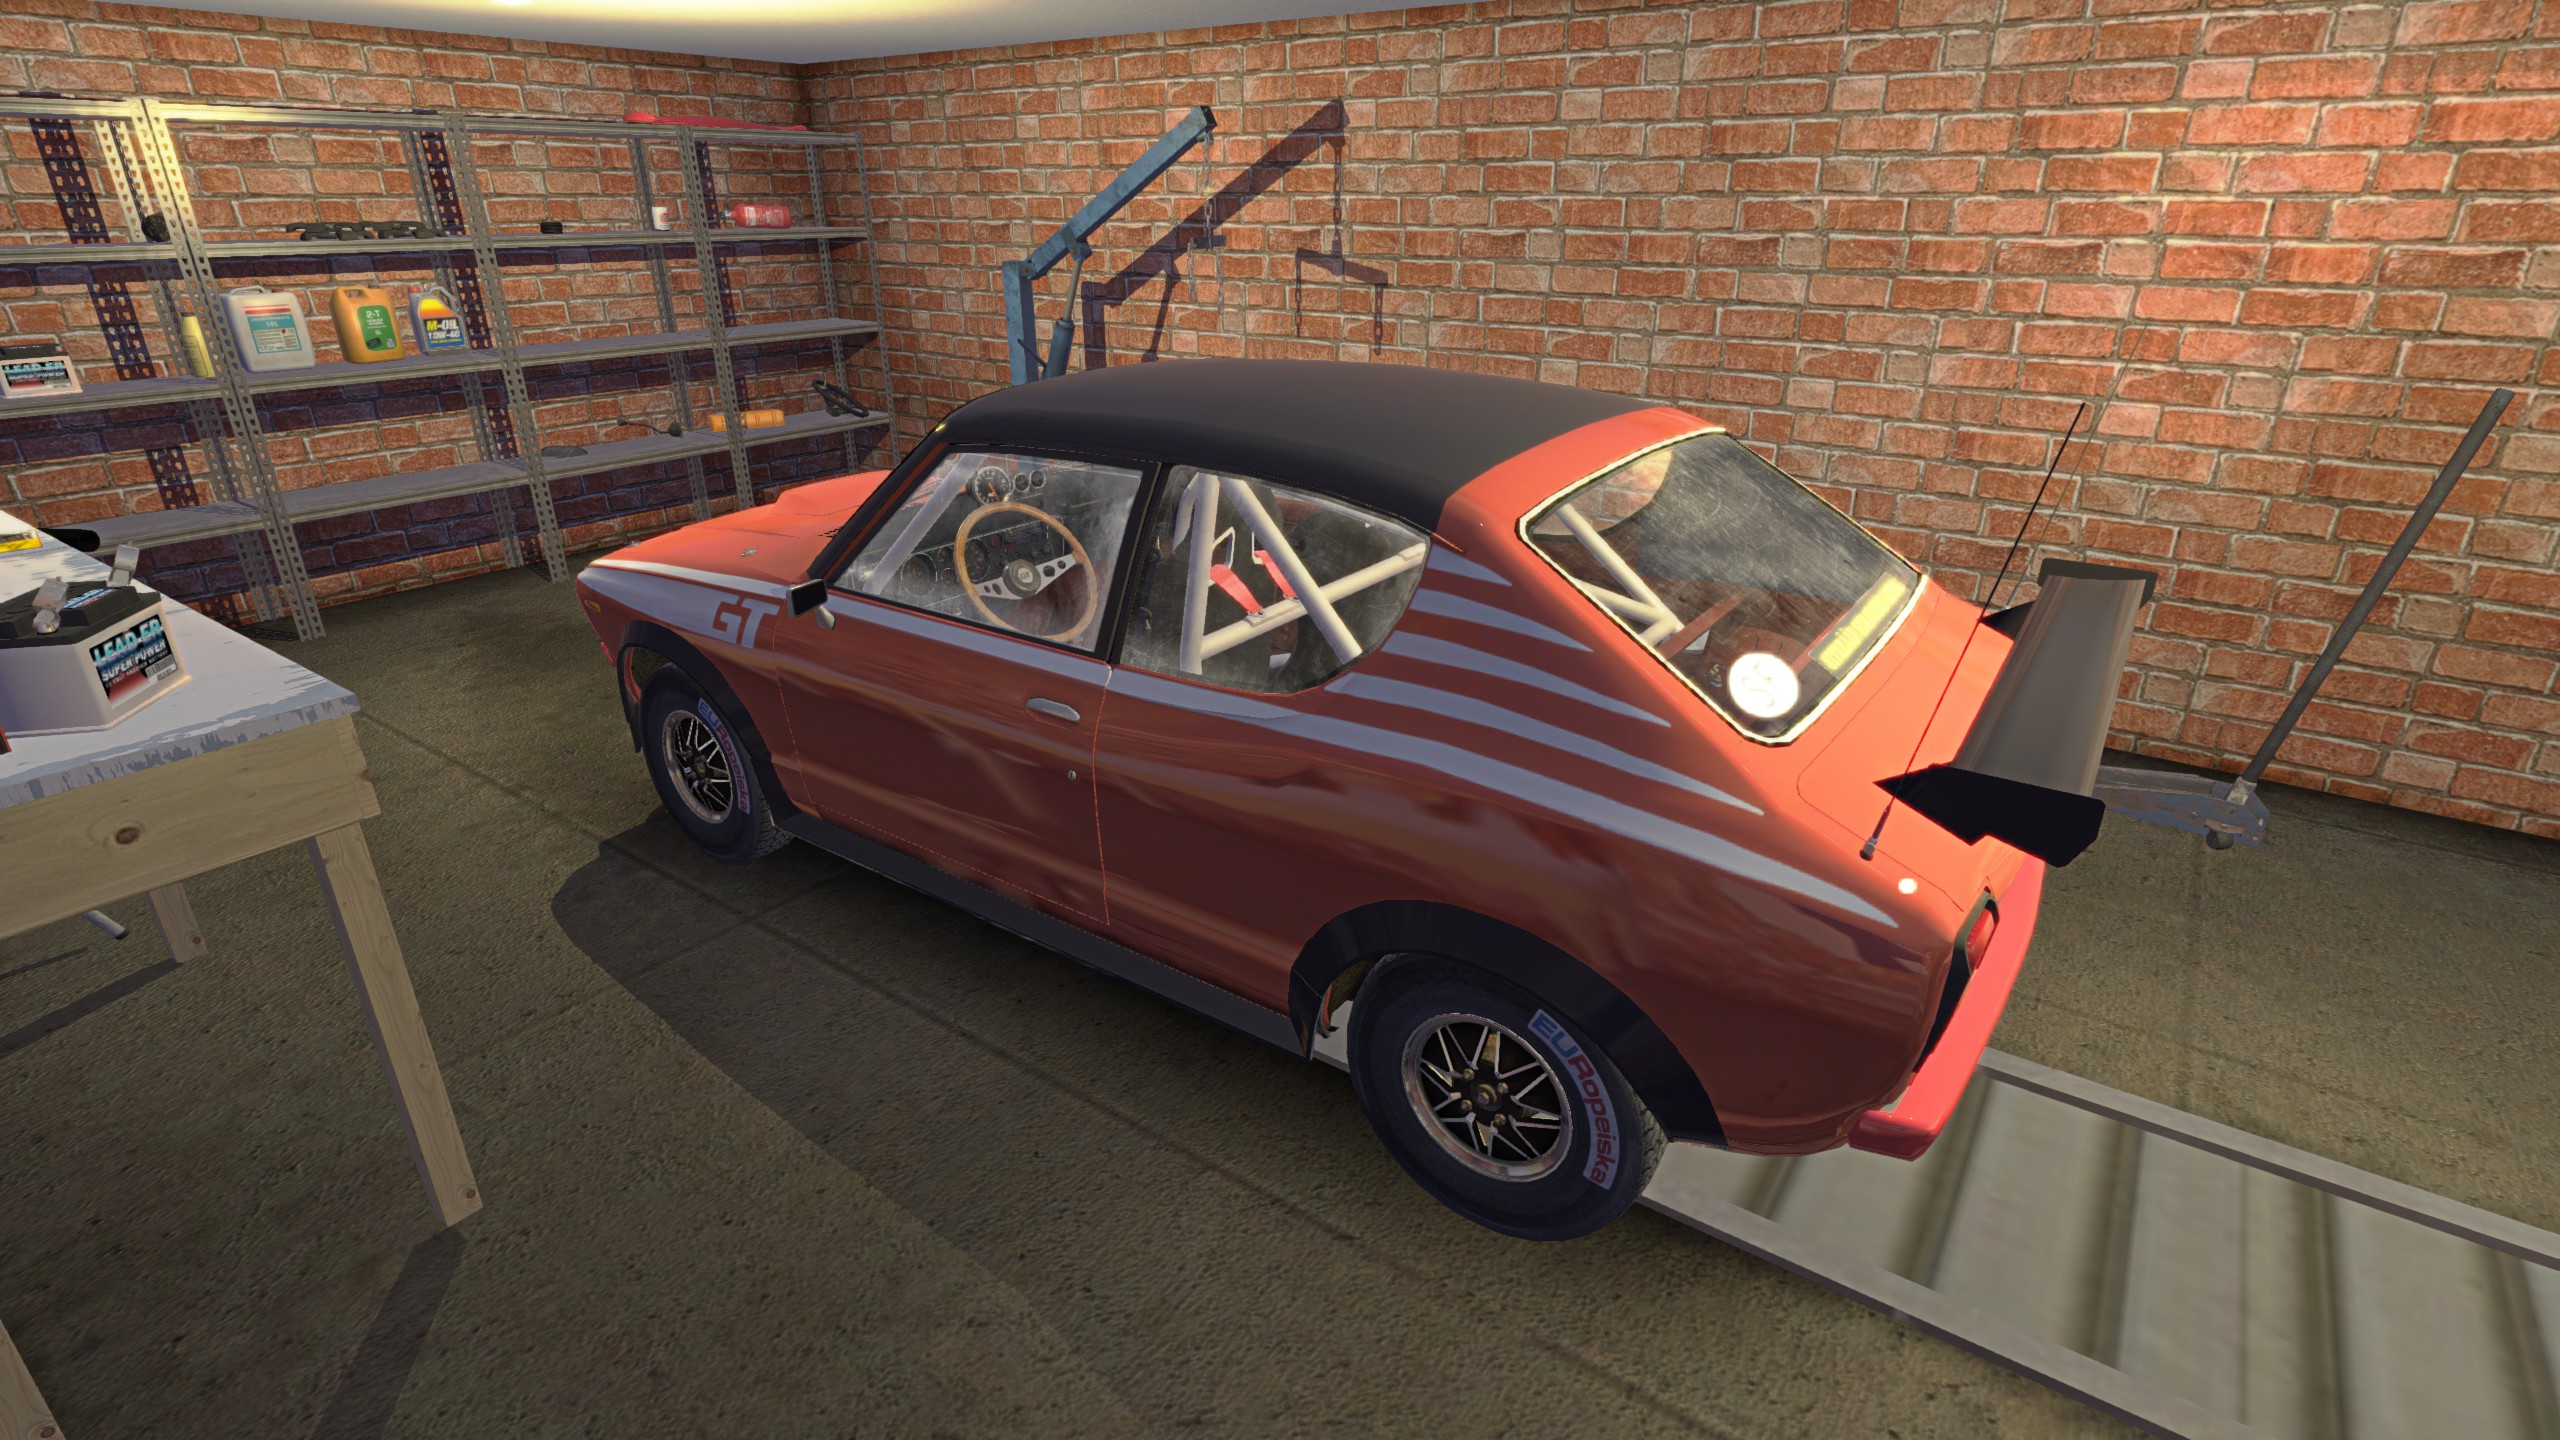 My-Summer-Car-Save-File-With-Everything-You-Want at My Summer Car